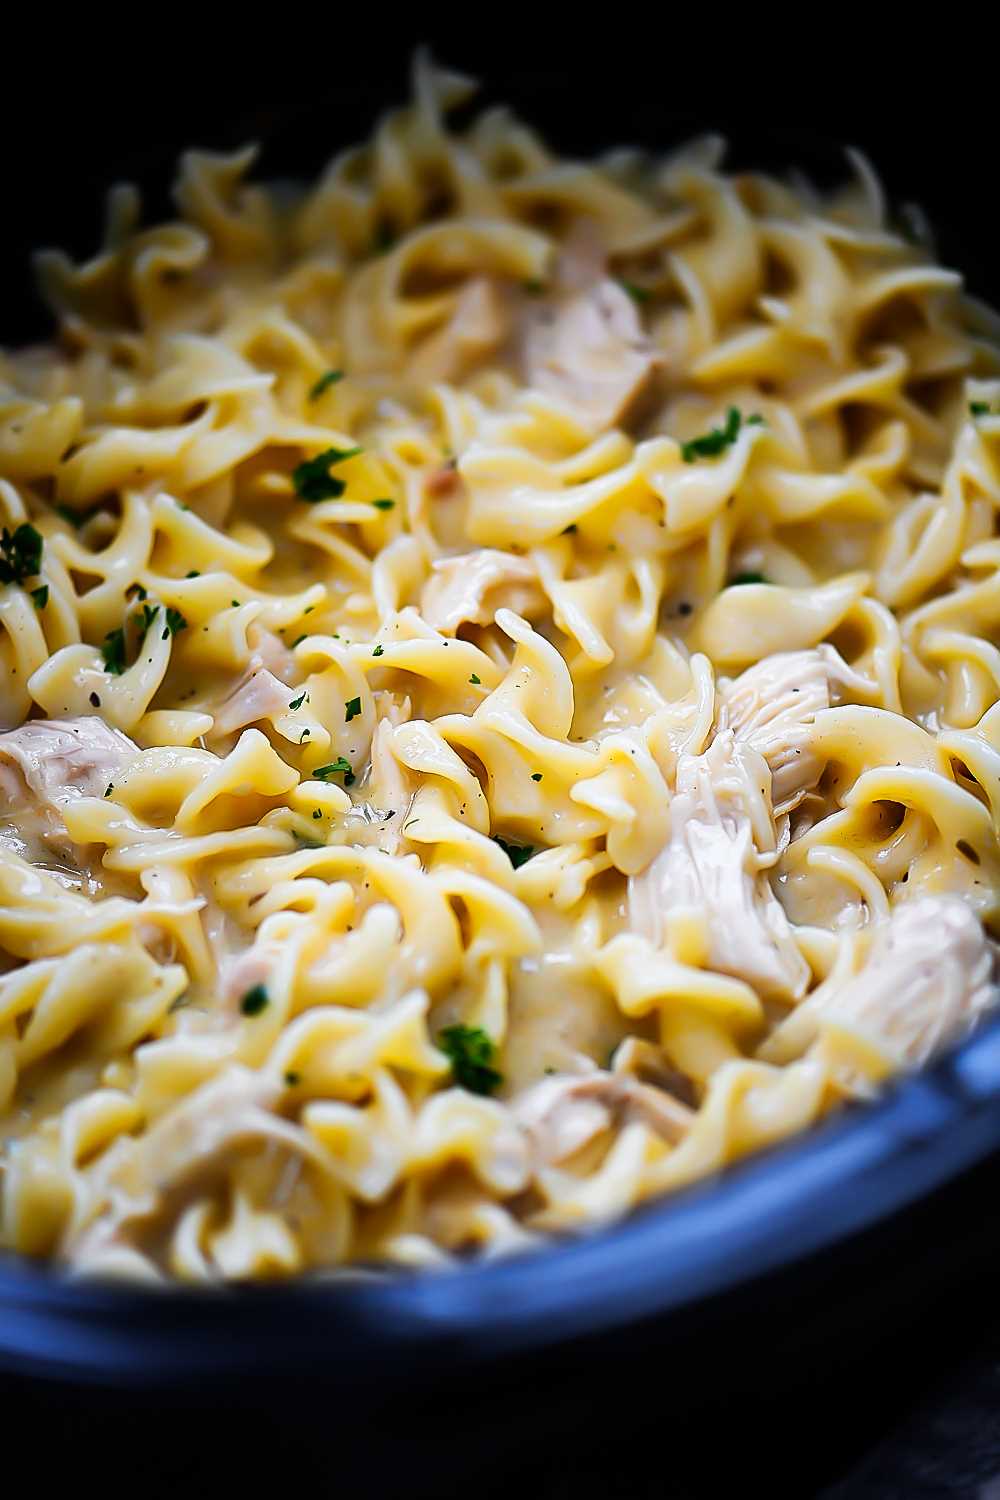 Chicken and egg noodles slow cook in the crock pot with seasonings and broth. Life-in-the-Lofthouse.com